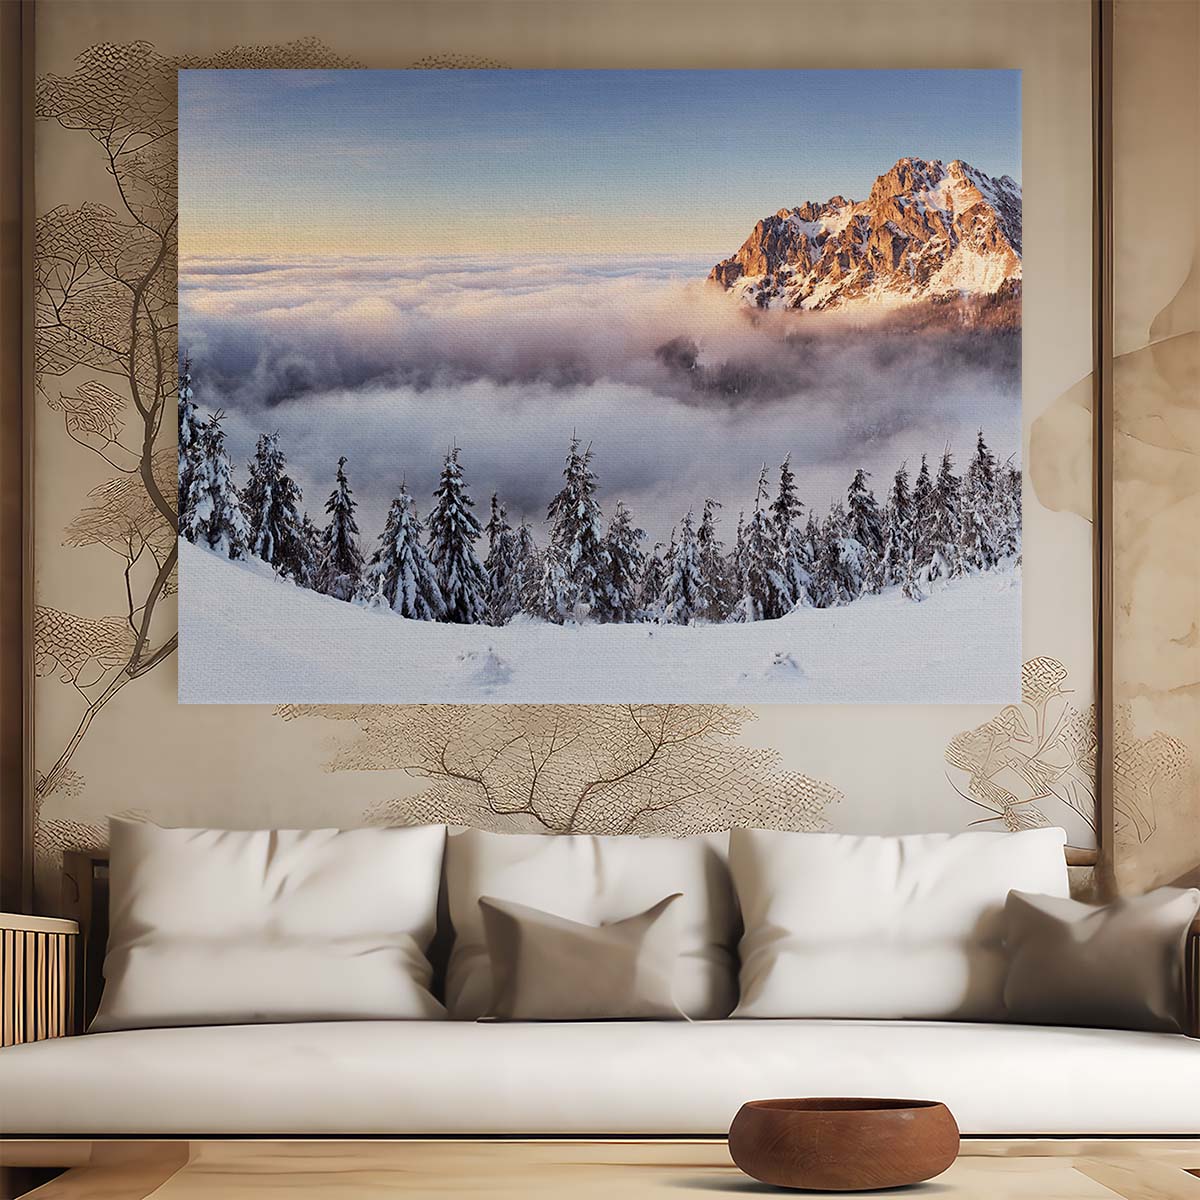 Majestic Mala Fatra Snow Peaks Panoramic Wall Art by Luxuriance Designs. Made in USA.